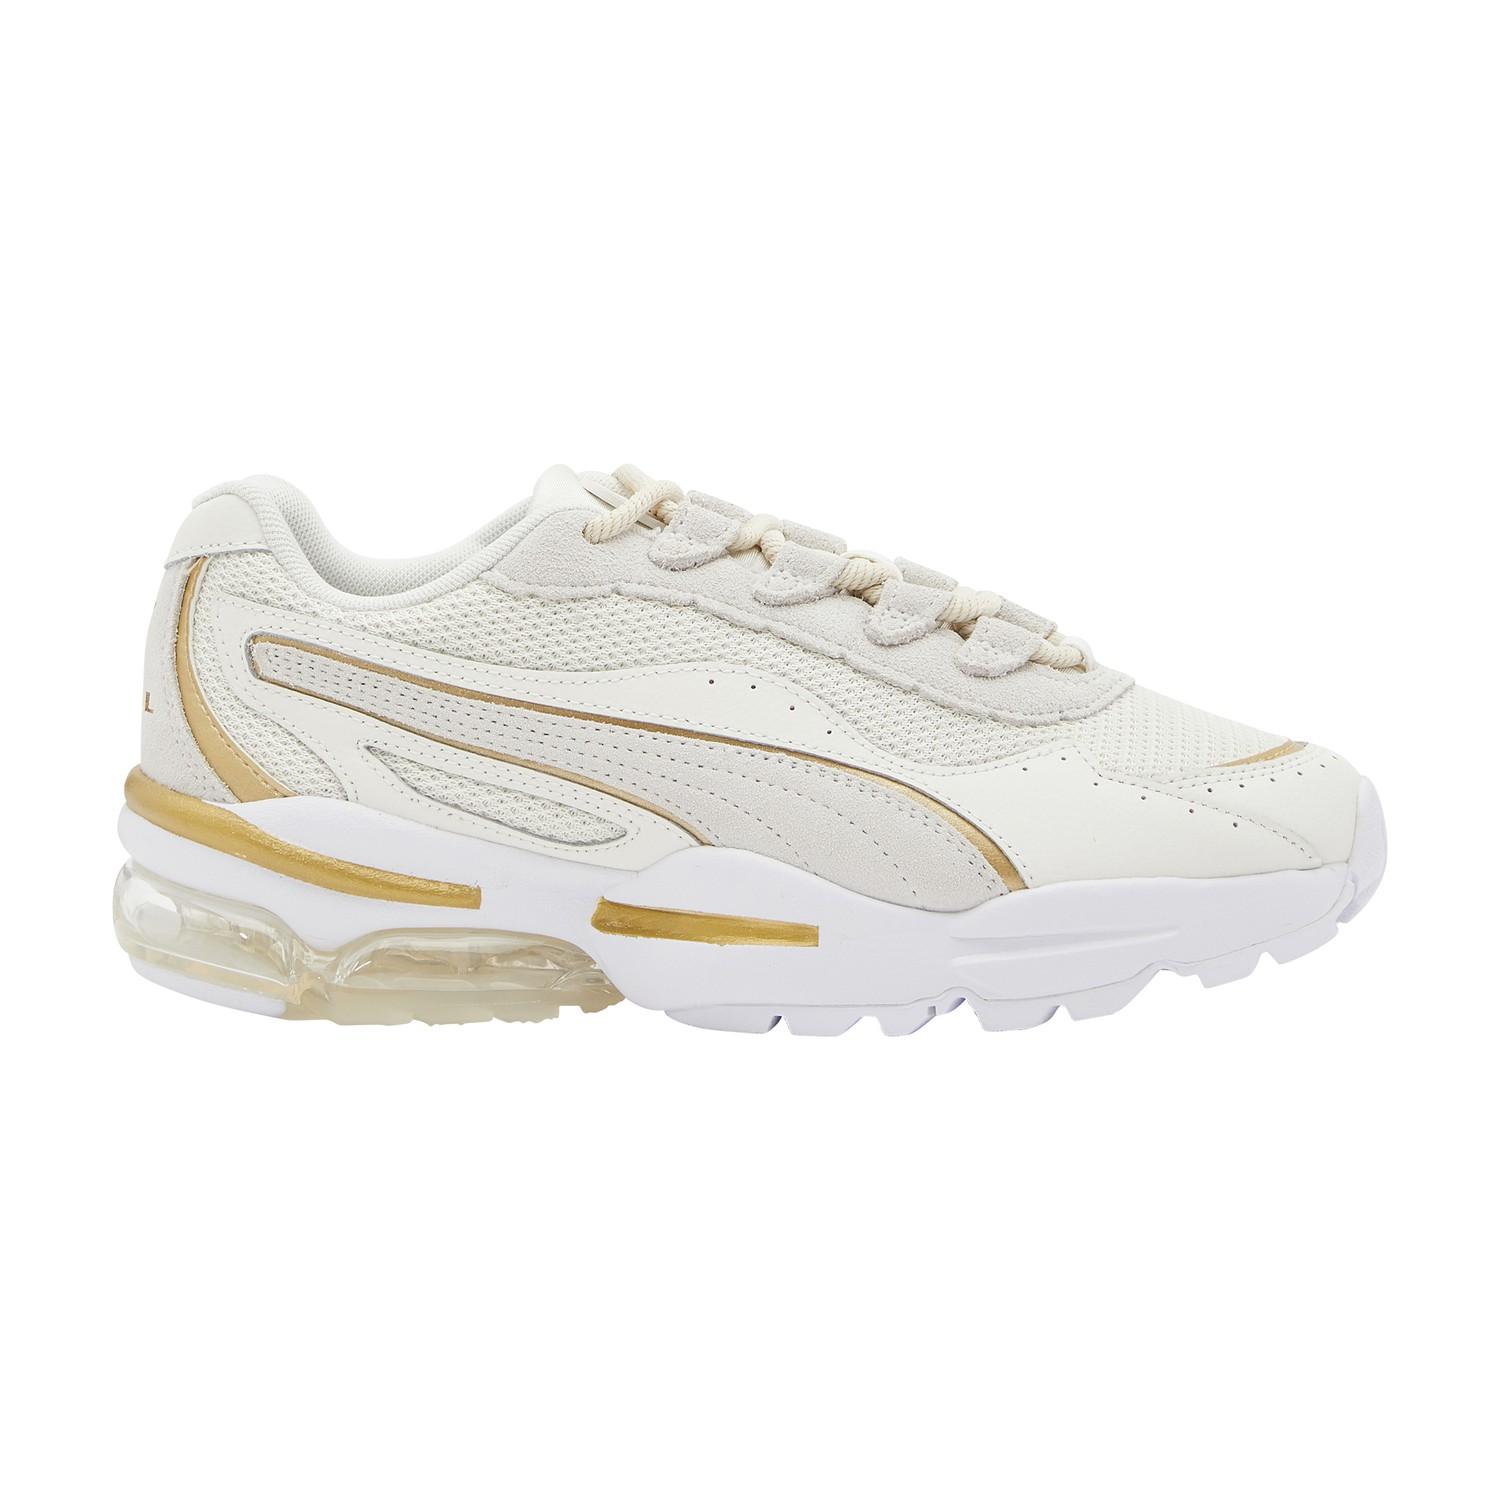 PUMA Cell Stellar Trainers in Soft (White) - Lyst